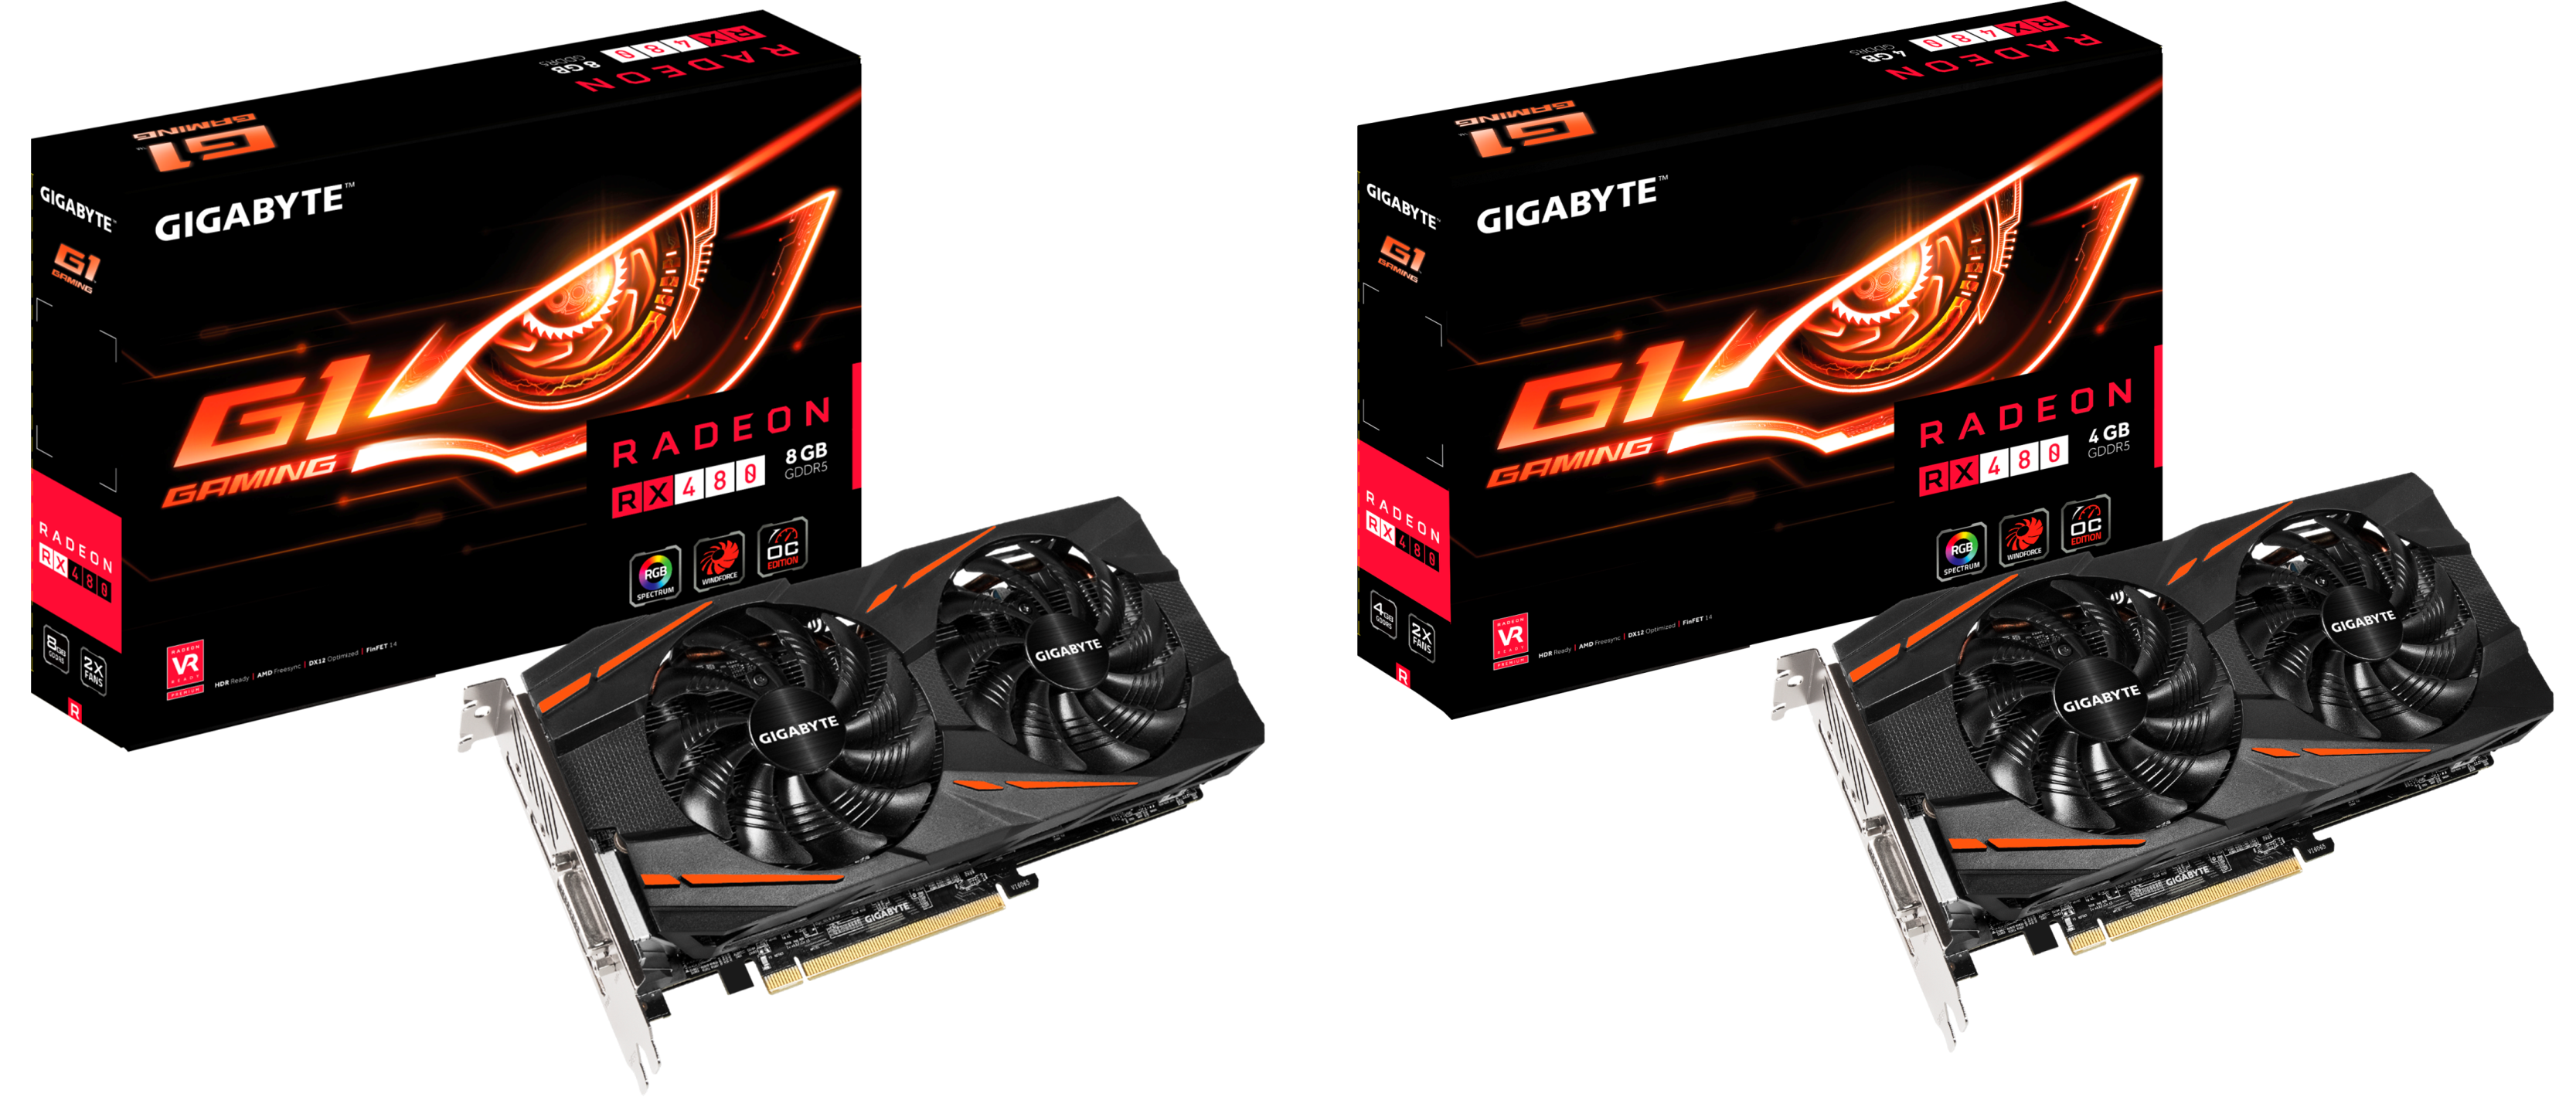 GIGABYTE Launches RX 480 G1 GAMING 